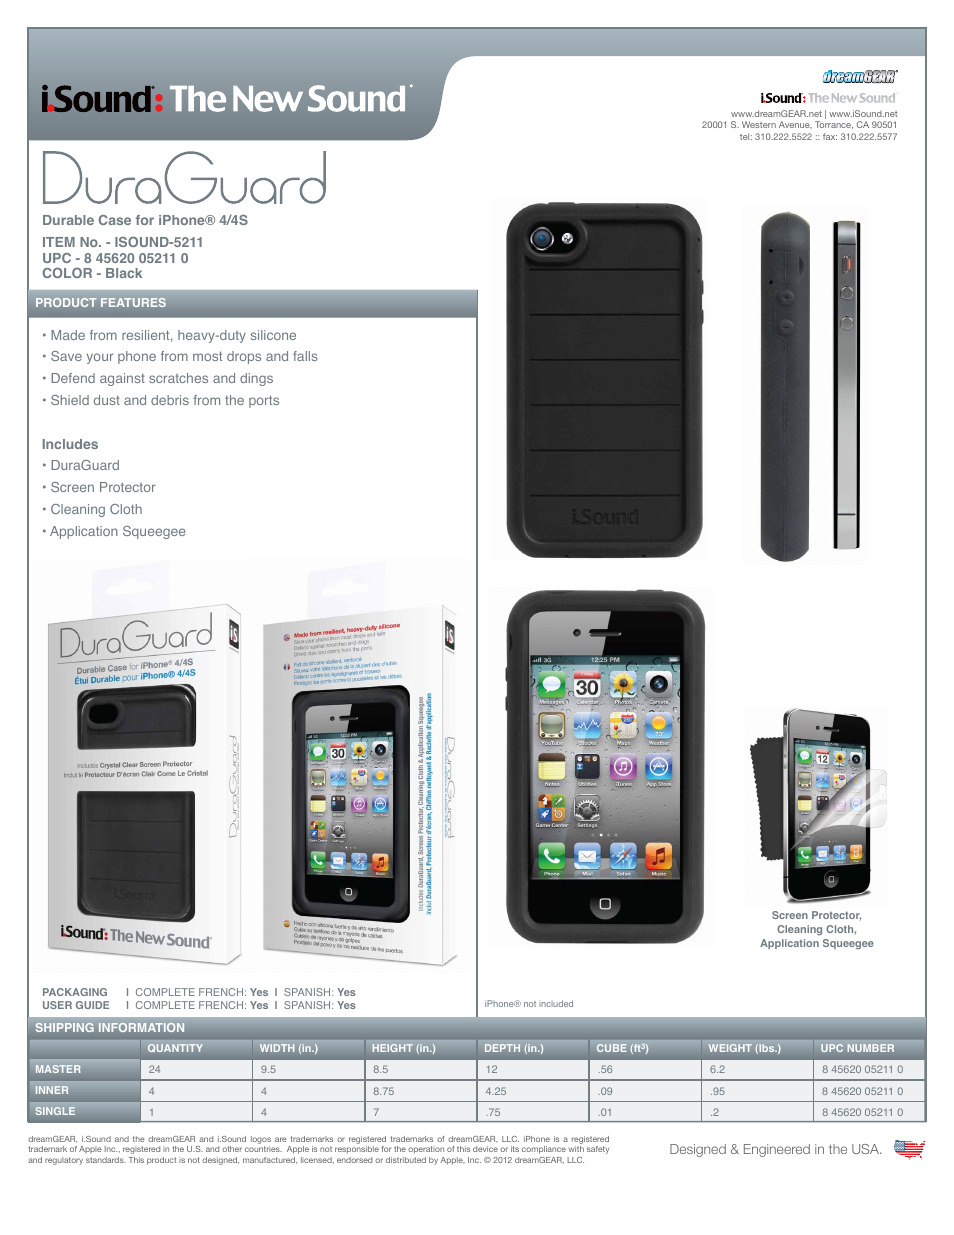 Duraguard for iPhone4-4S - Sell Sheet